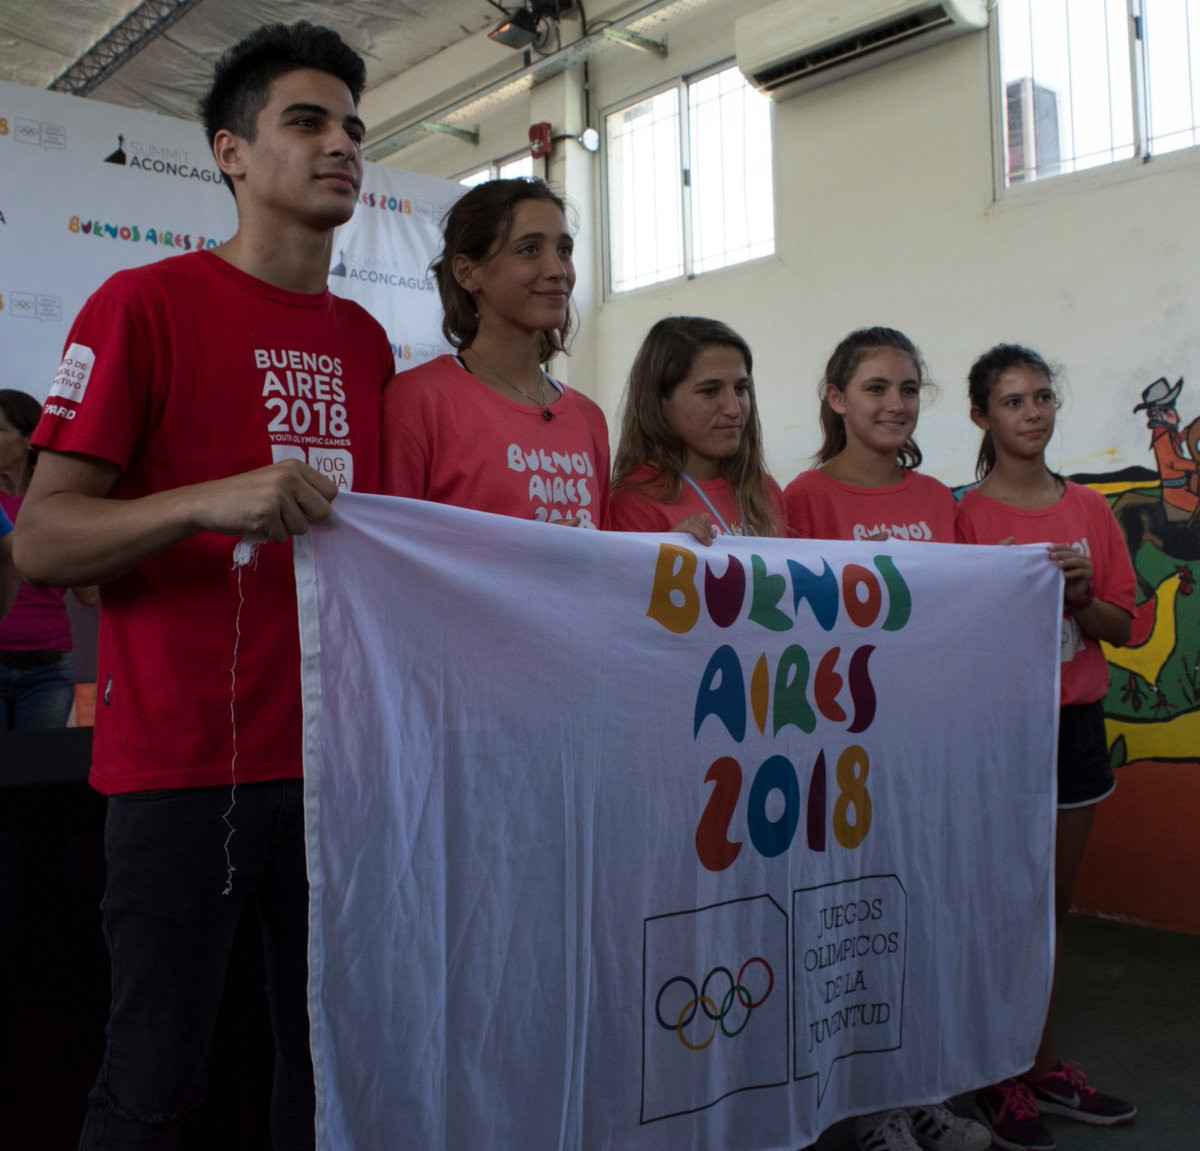 Olympic athletes were part of the expedition ©Buenos Aires 2018
